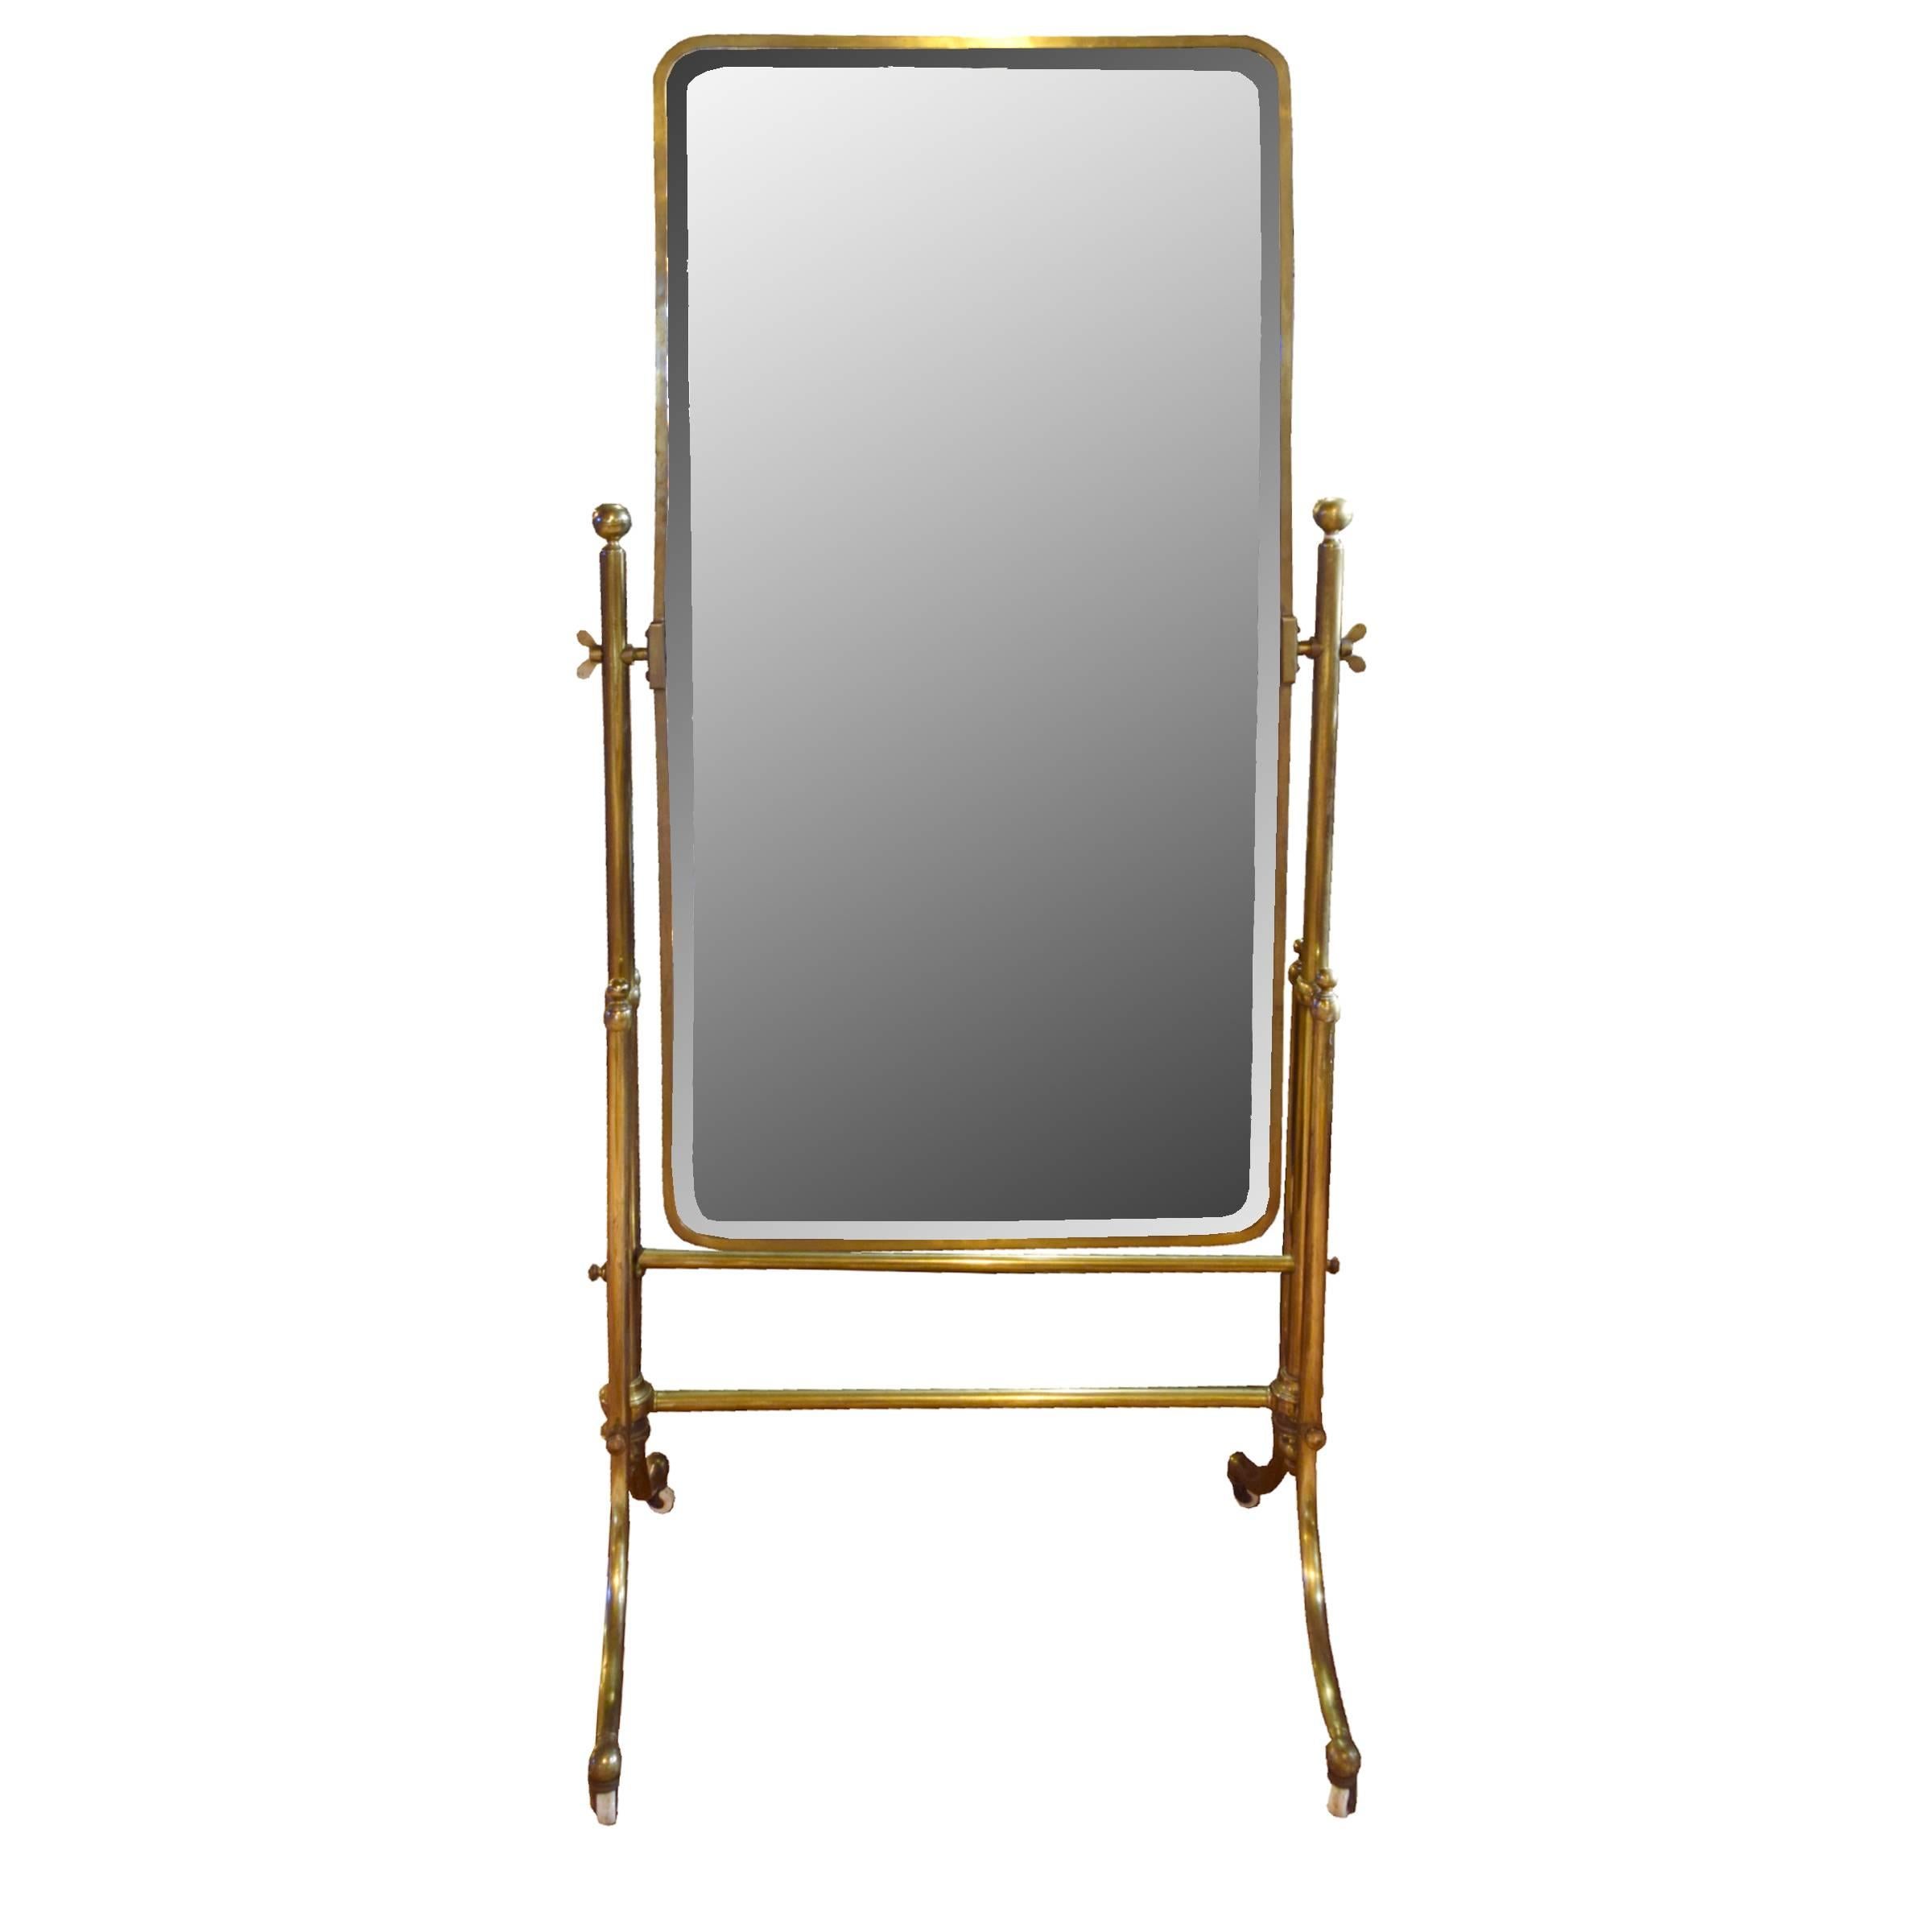 A very nice pivoting French brass dressing mirror with beveled glass with rounded corners and four legs on porcelain wheels, circa 1900.